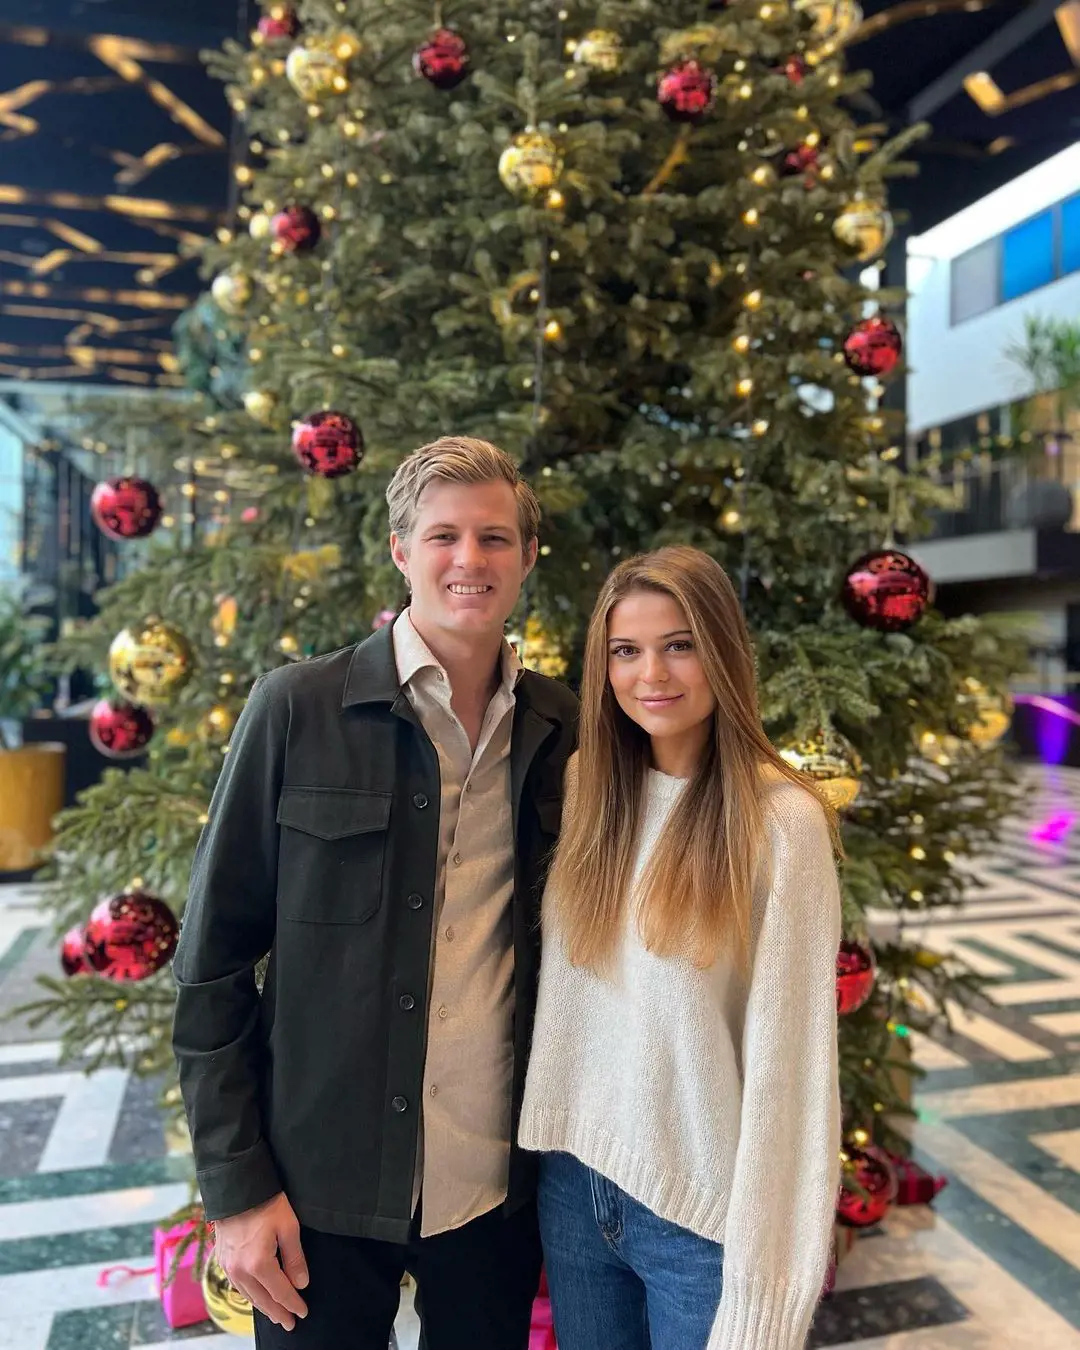 Marcus and Iris striking a pose in front of an Xmas tree during 2022 Christmas in Copenhagen